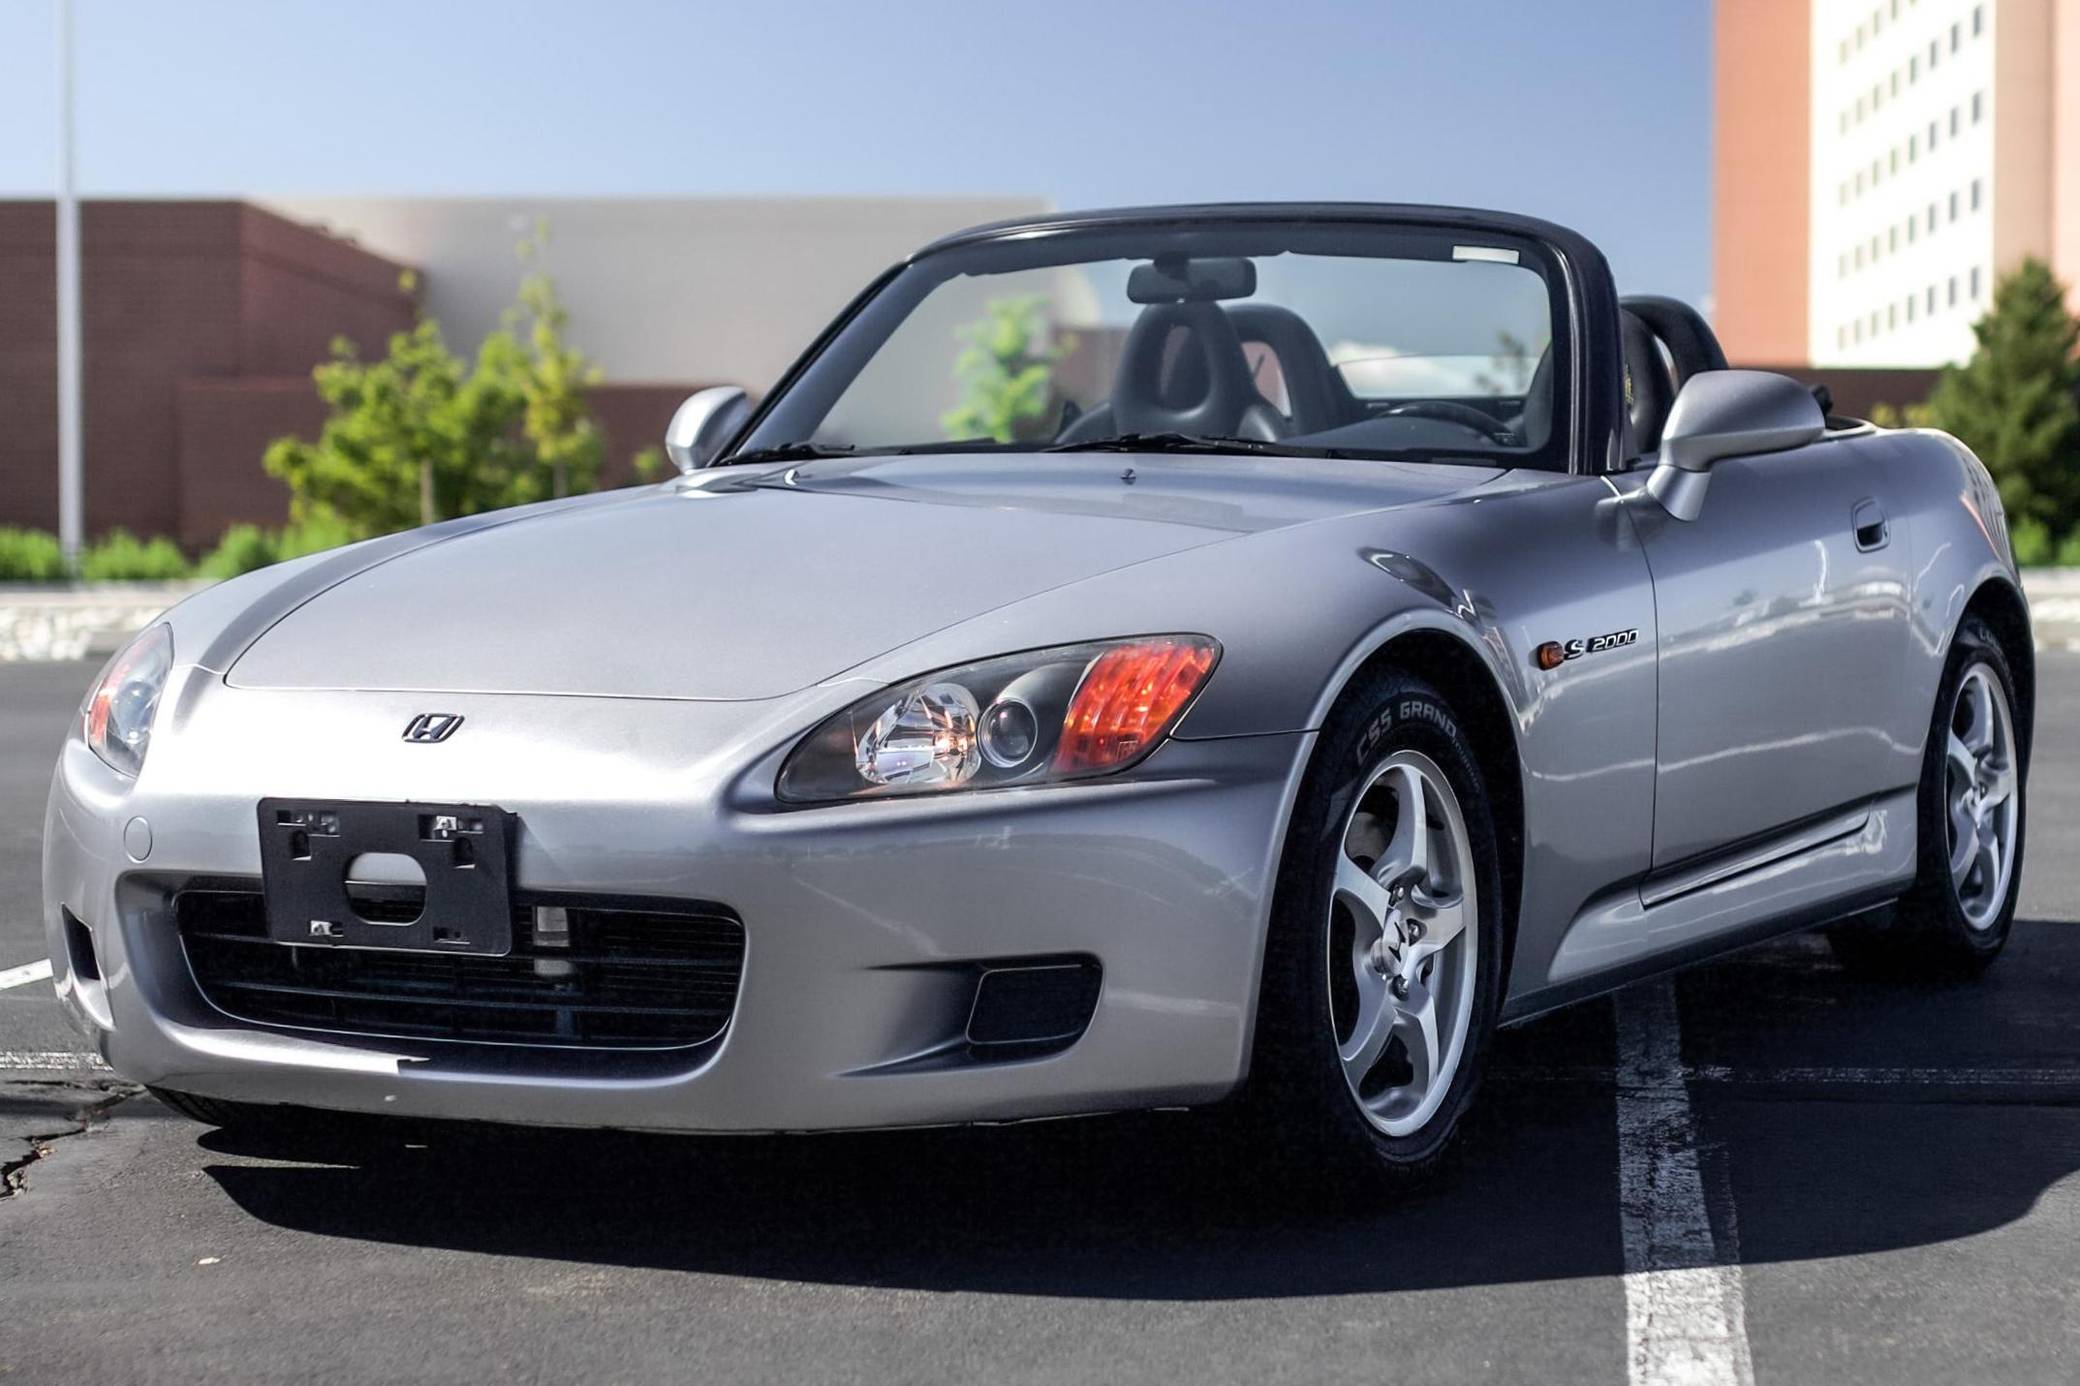 Mint-Condition Honda S2000 Has Only Gone 1,000 Miles